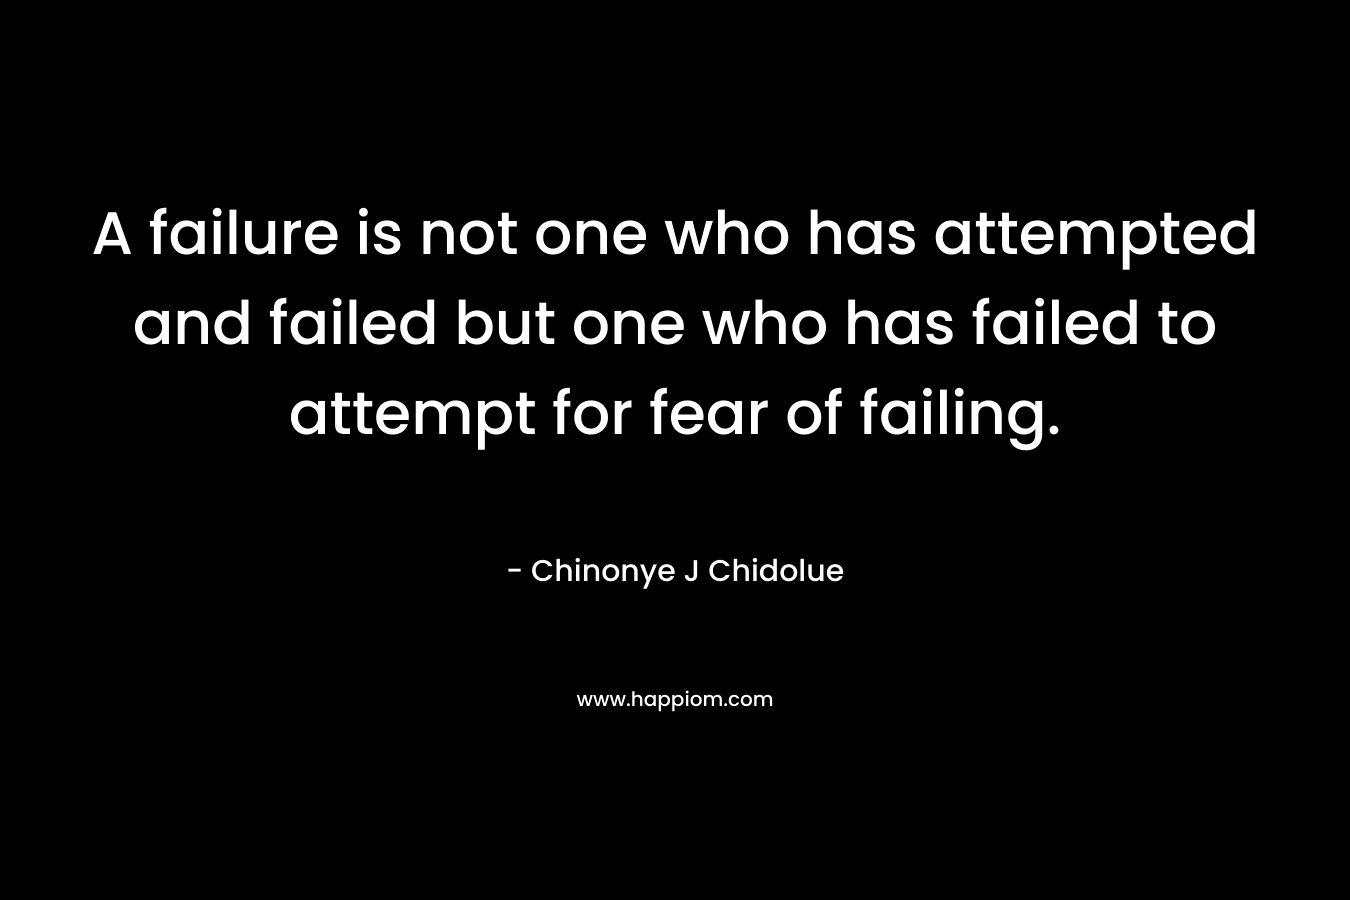 A failure is not one who has attempted and failed but one who has failed to attempt for fear of failing.